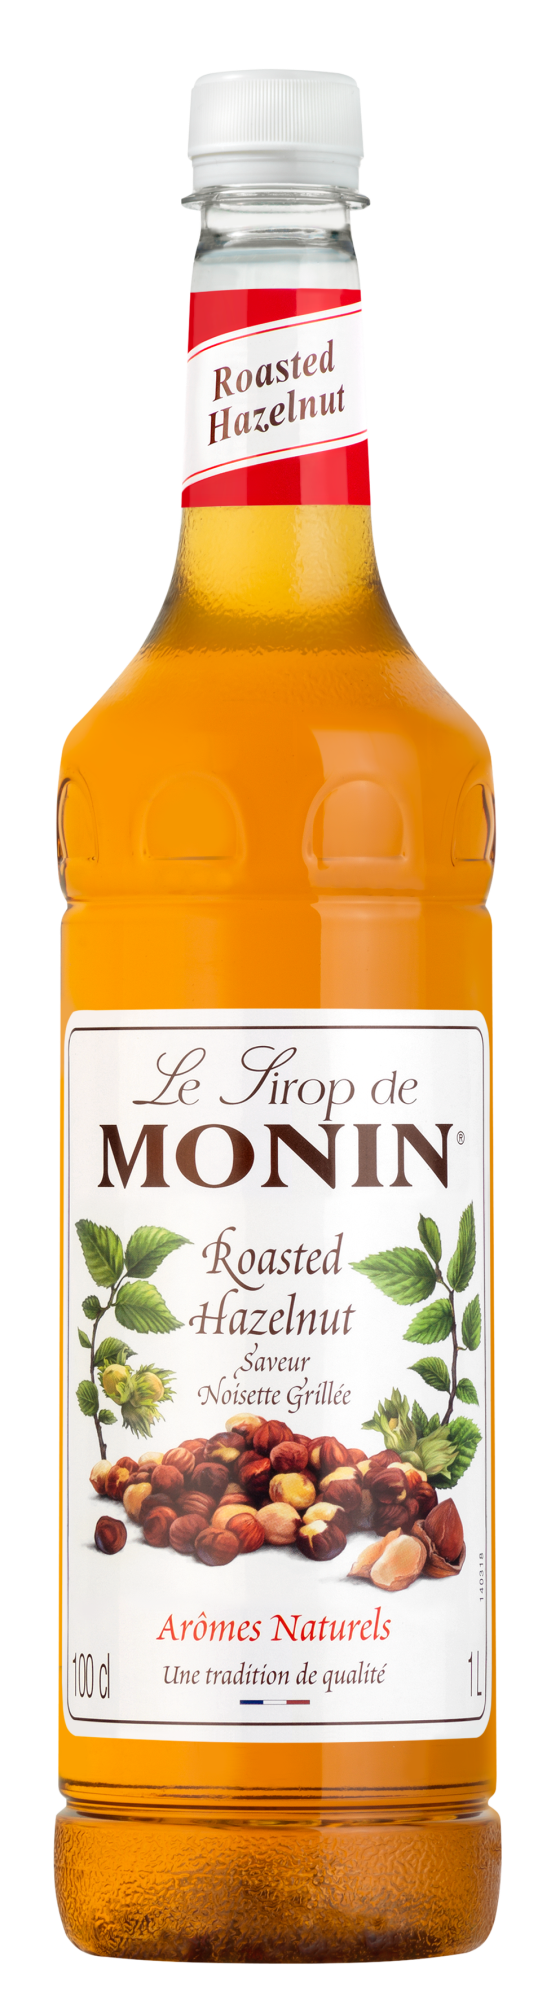 Buy MONIN Roasted Hazelnut Syrup. It has an intensely rich aroma of roasted nuts.